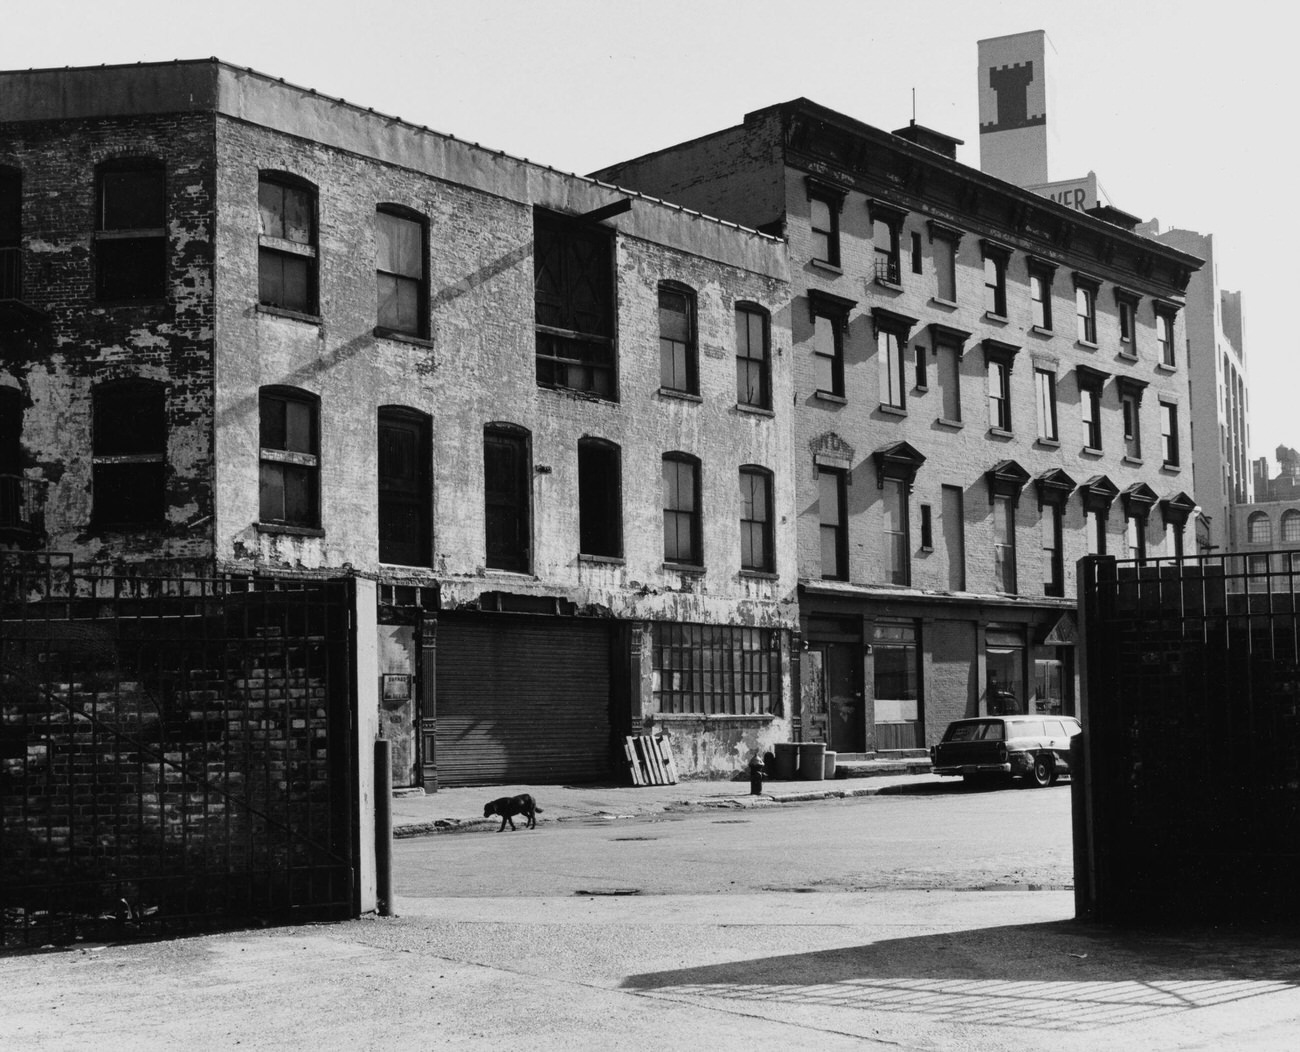 Buildings At 4 And 2 Water Street, Once The Franklin House Hotel, Brooklyn, 1975.